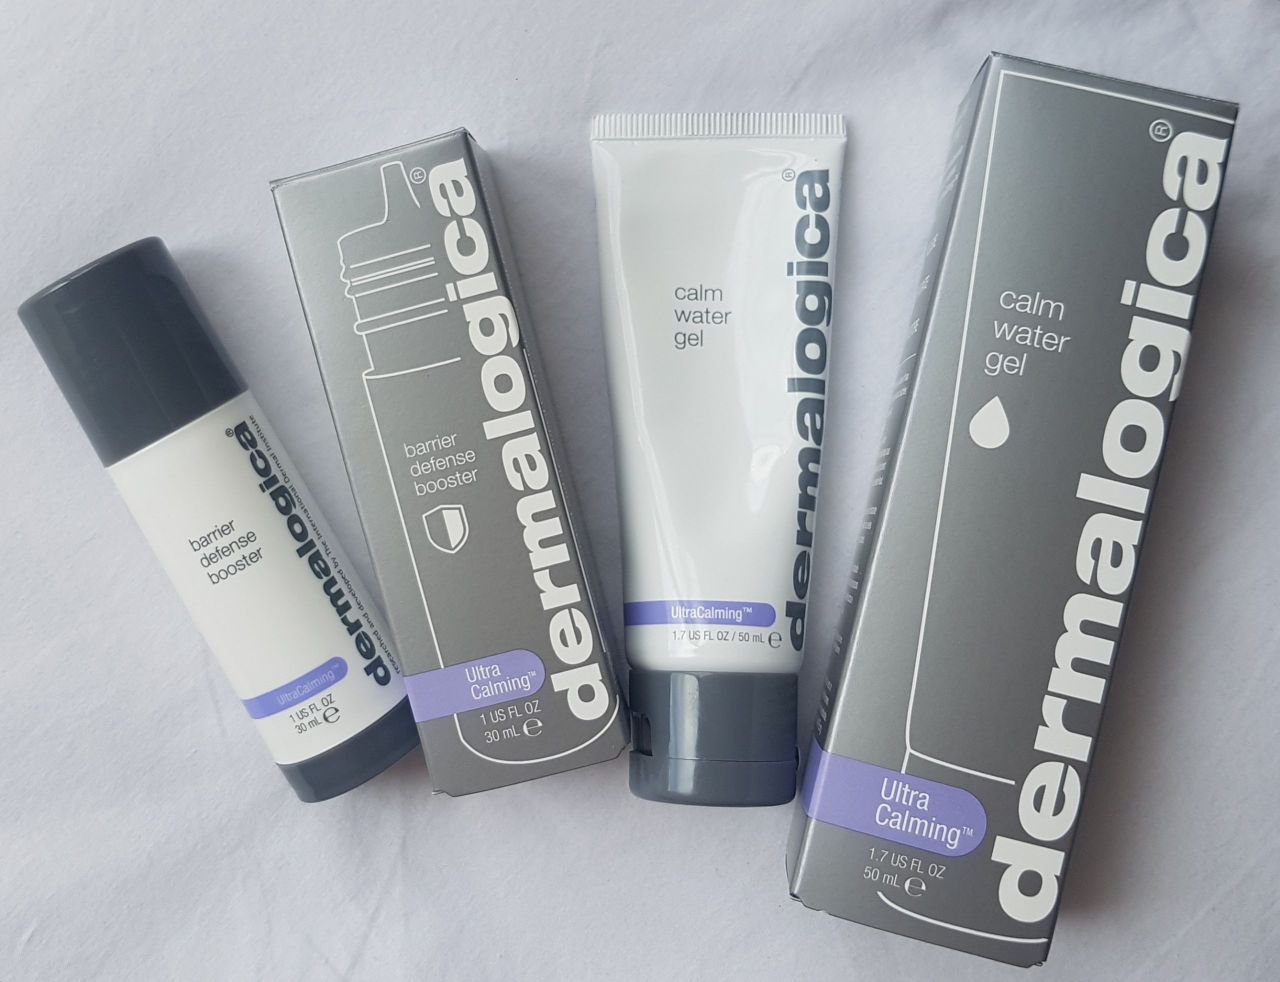 The new Dermalogica UltraCalming duo is AMAZING!